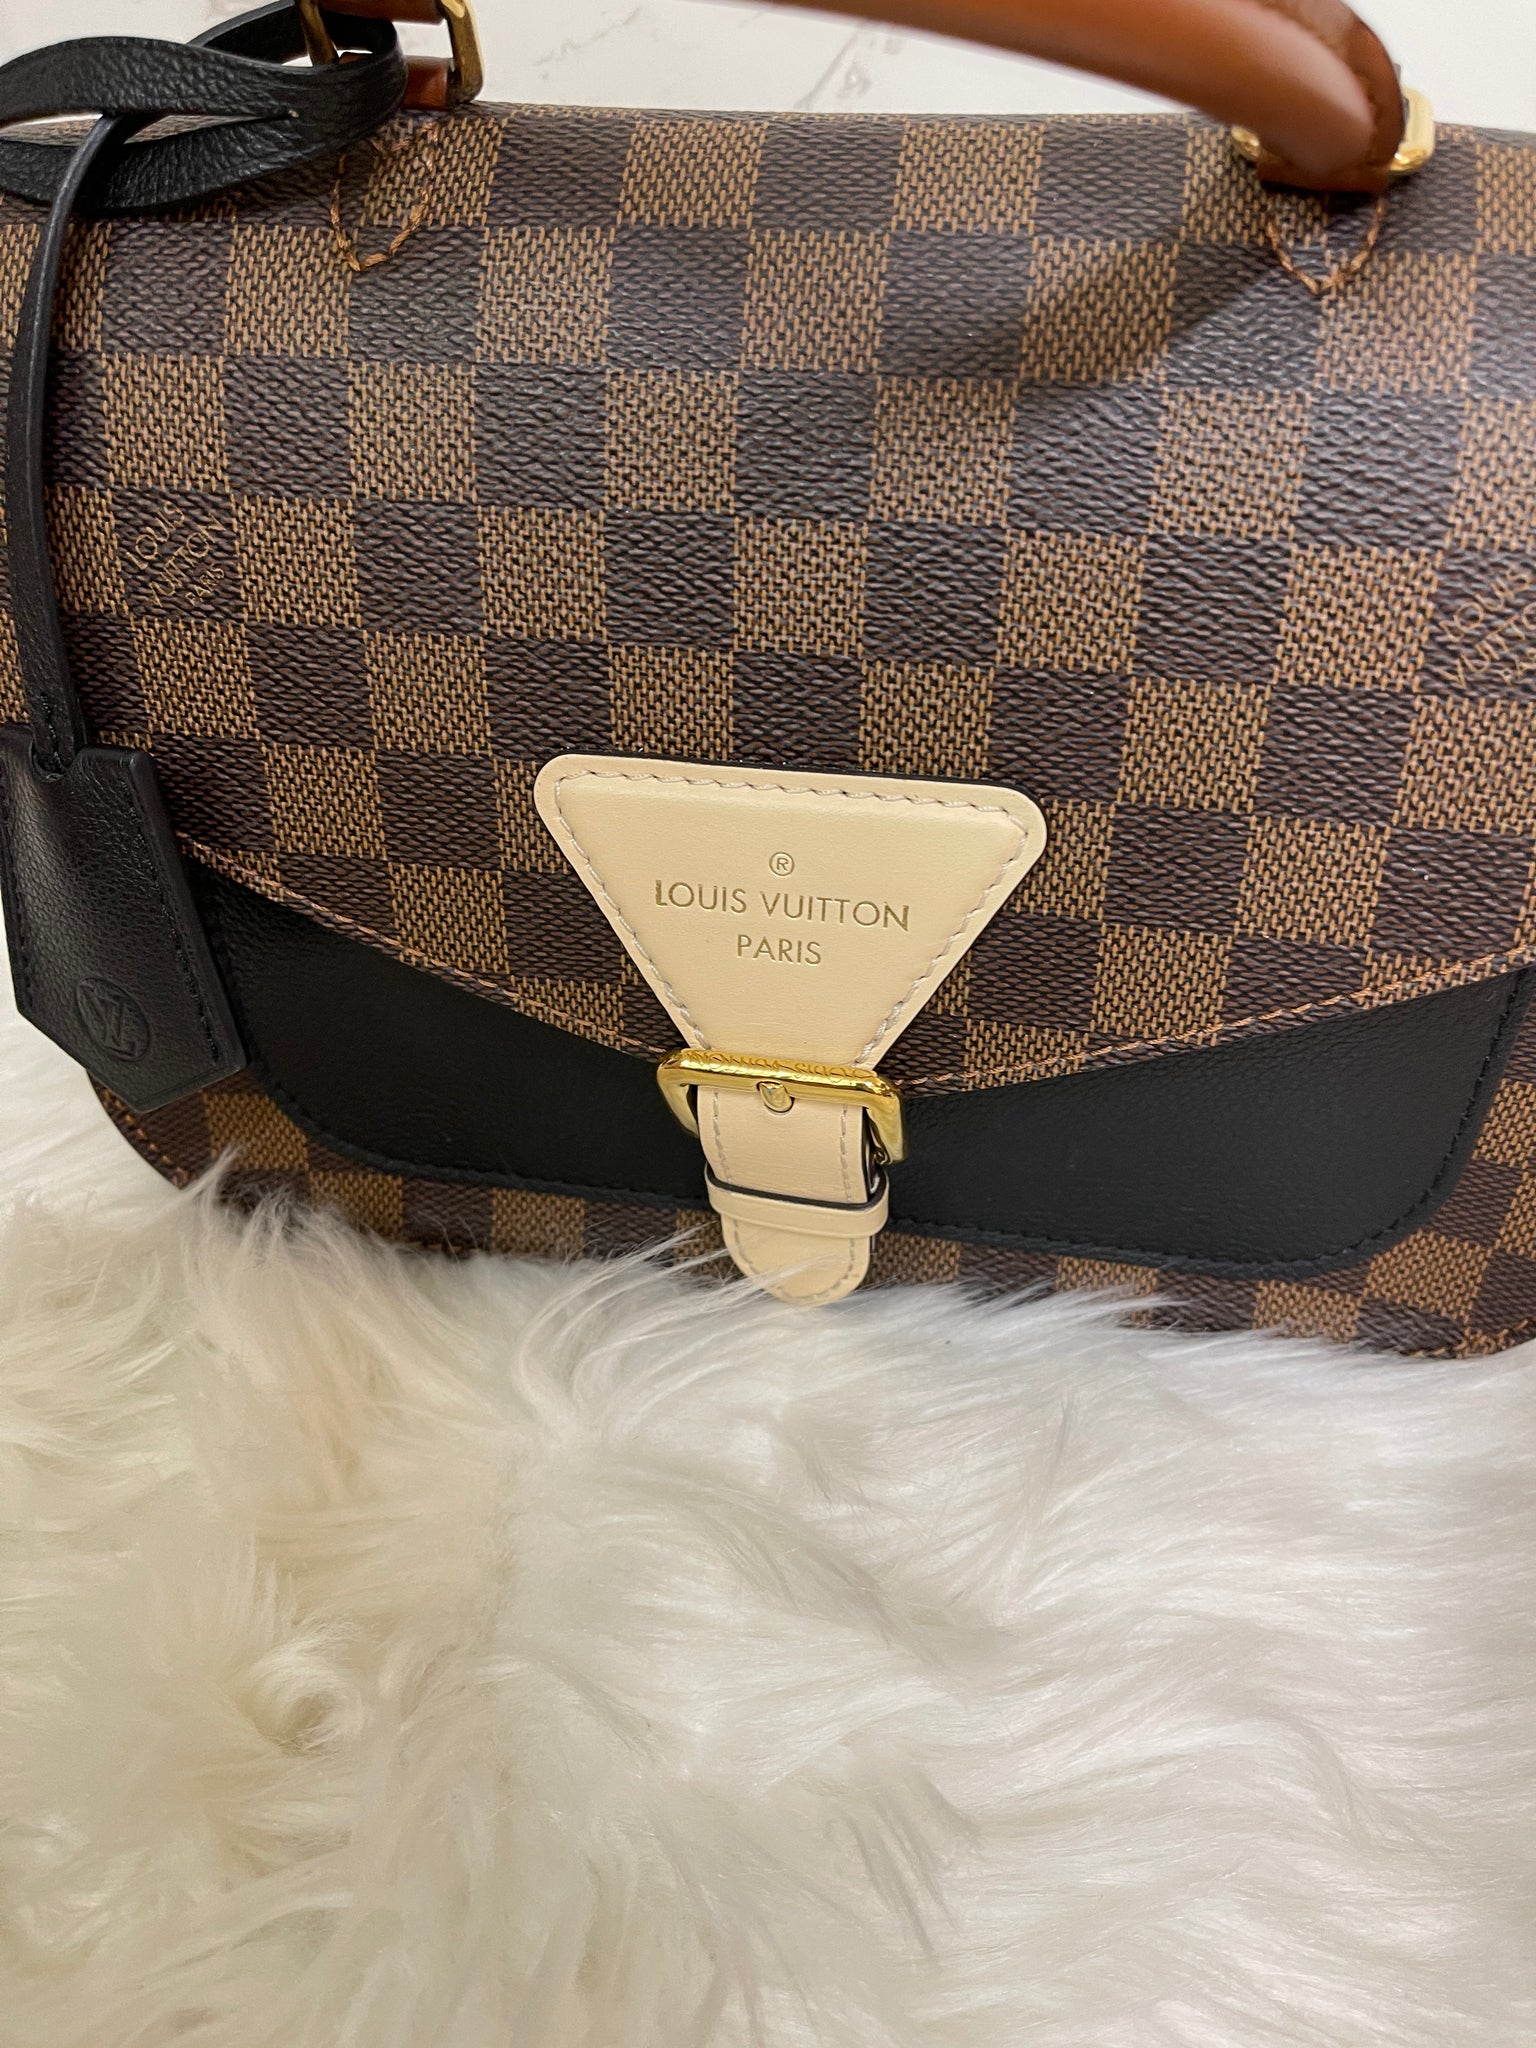 Thoughts on the LV Beaumarchais